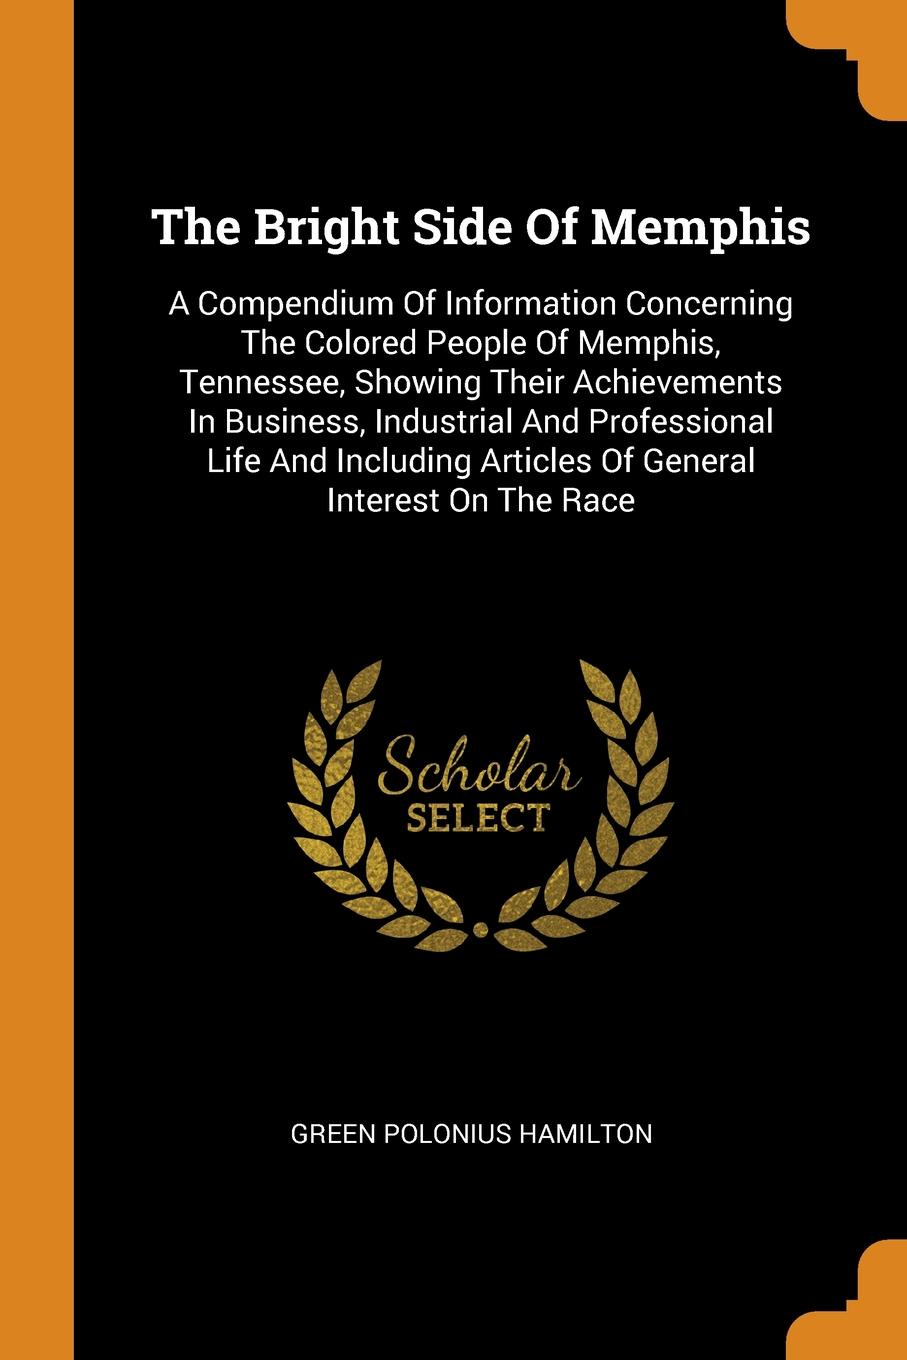 The Bright Side Of Memphis. A Compendium Of Information Concerning The Colored People Of Memphis, Tennessee, Showing Their Achievements In Business, Industrial And Professional Life And Including Articles Of General Interest On The Race